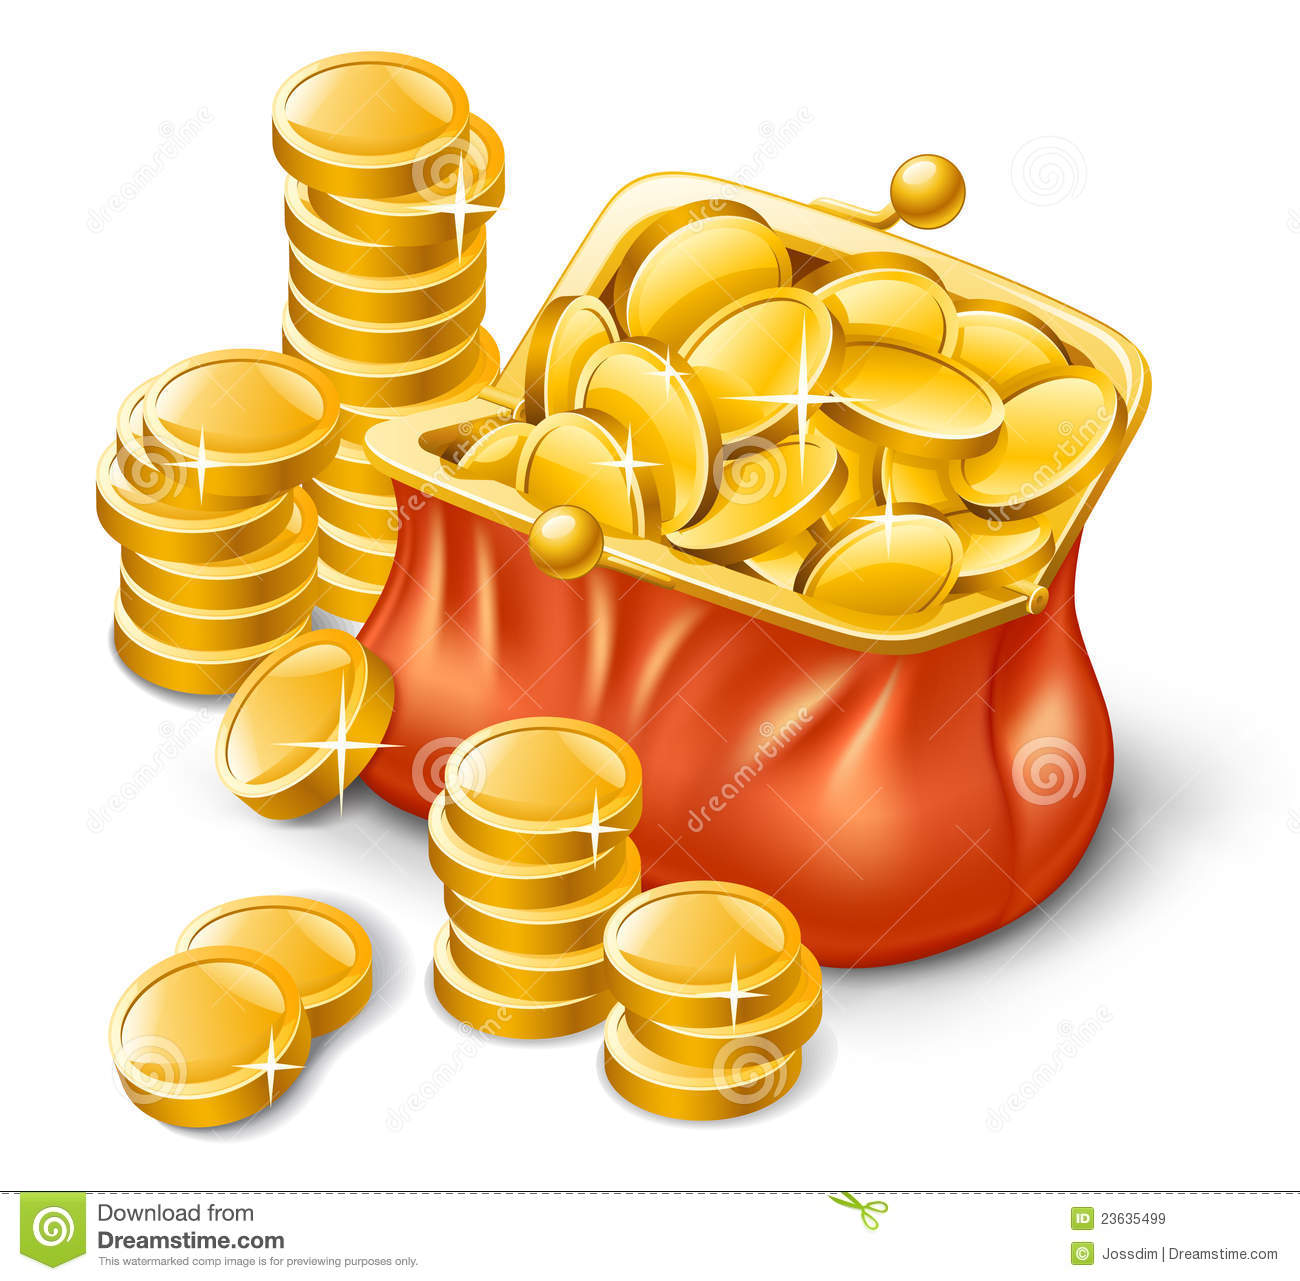 Wallet Full Of Coins Royalty Free Stock Images   Image  23635499